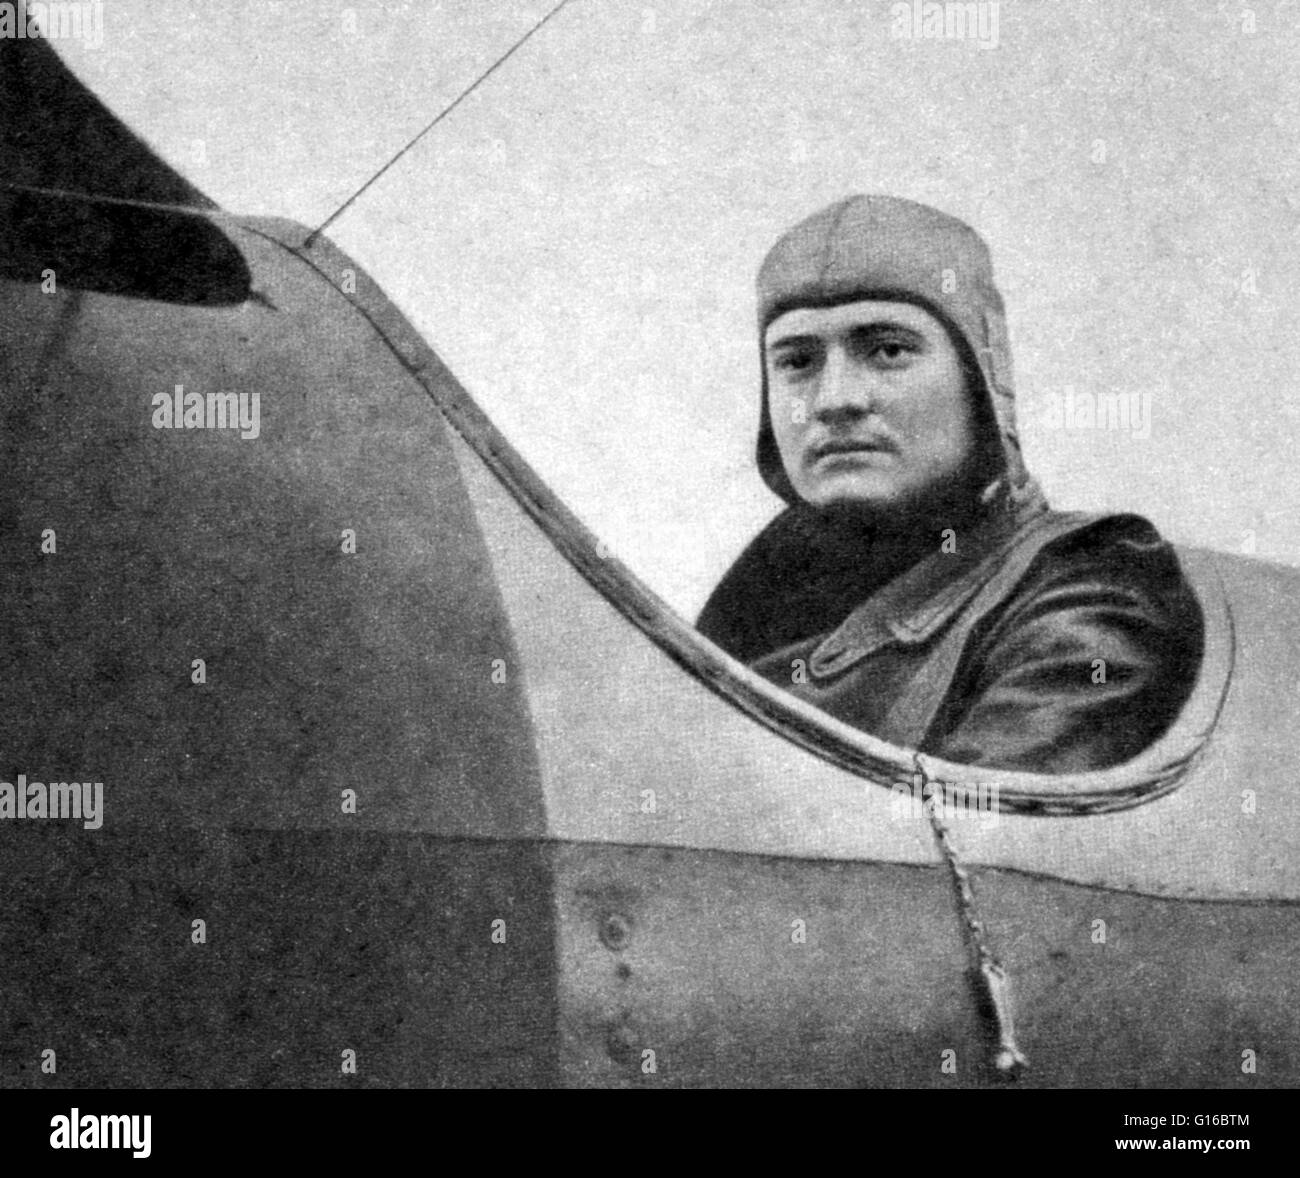 Manfred Albrecht Freiherr von Richthofen (May 2, 1892 - April 21, 1918) was a WWI German flying ace with the Imperial German Army Air Service (Luftstreitkräfte). Originally a cavalryman, he transferred to the Air Service in 1915, becoming one of the first Stock Photo